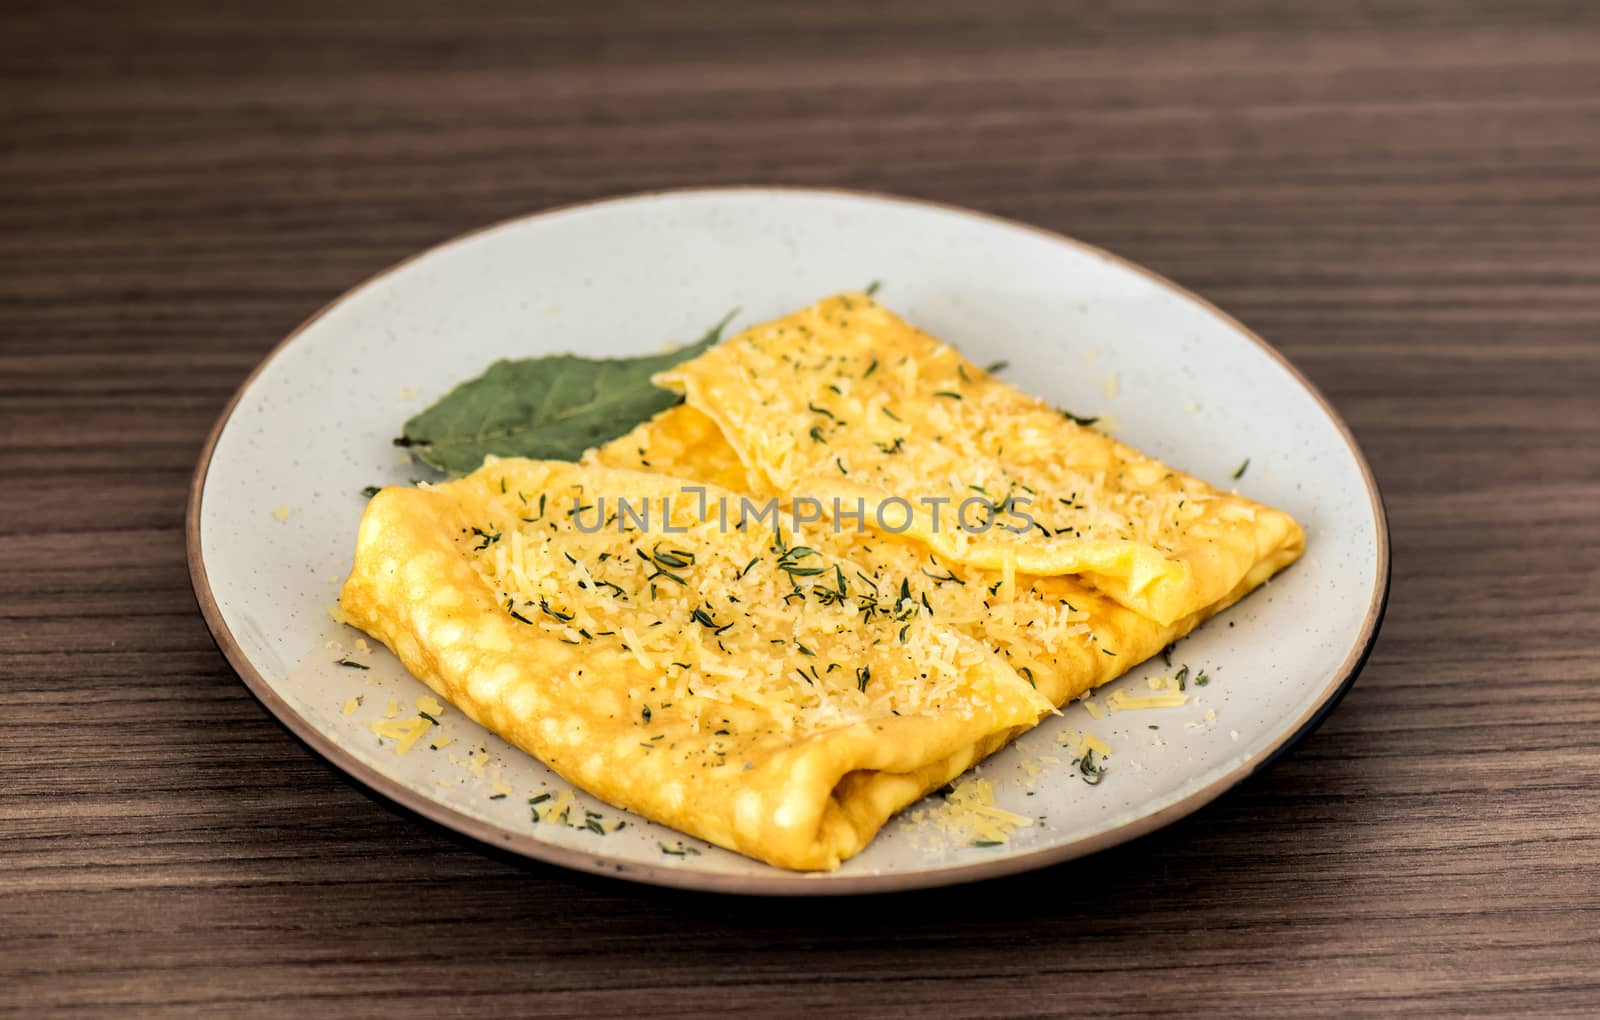 Delicious breakfast dish of omelette with parmesan cheese and thyme